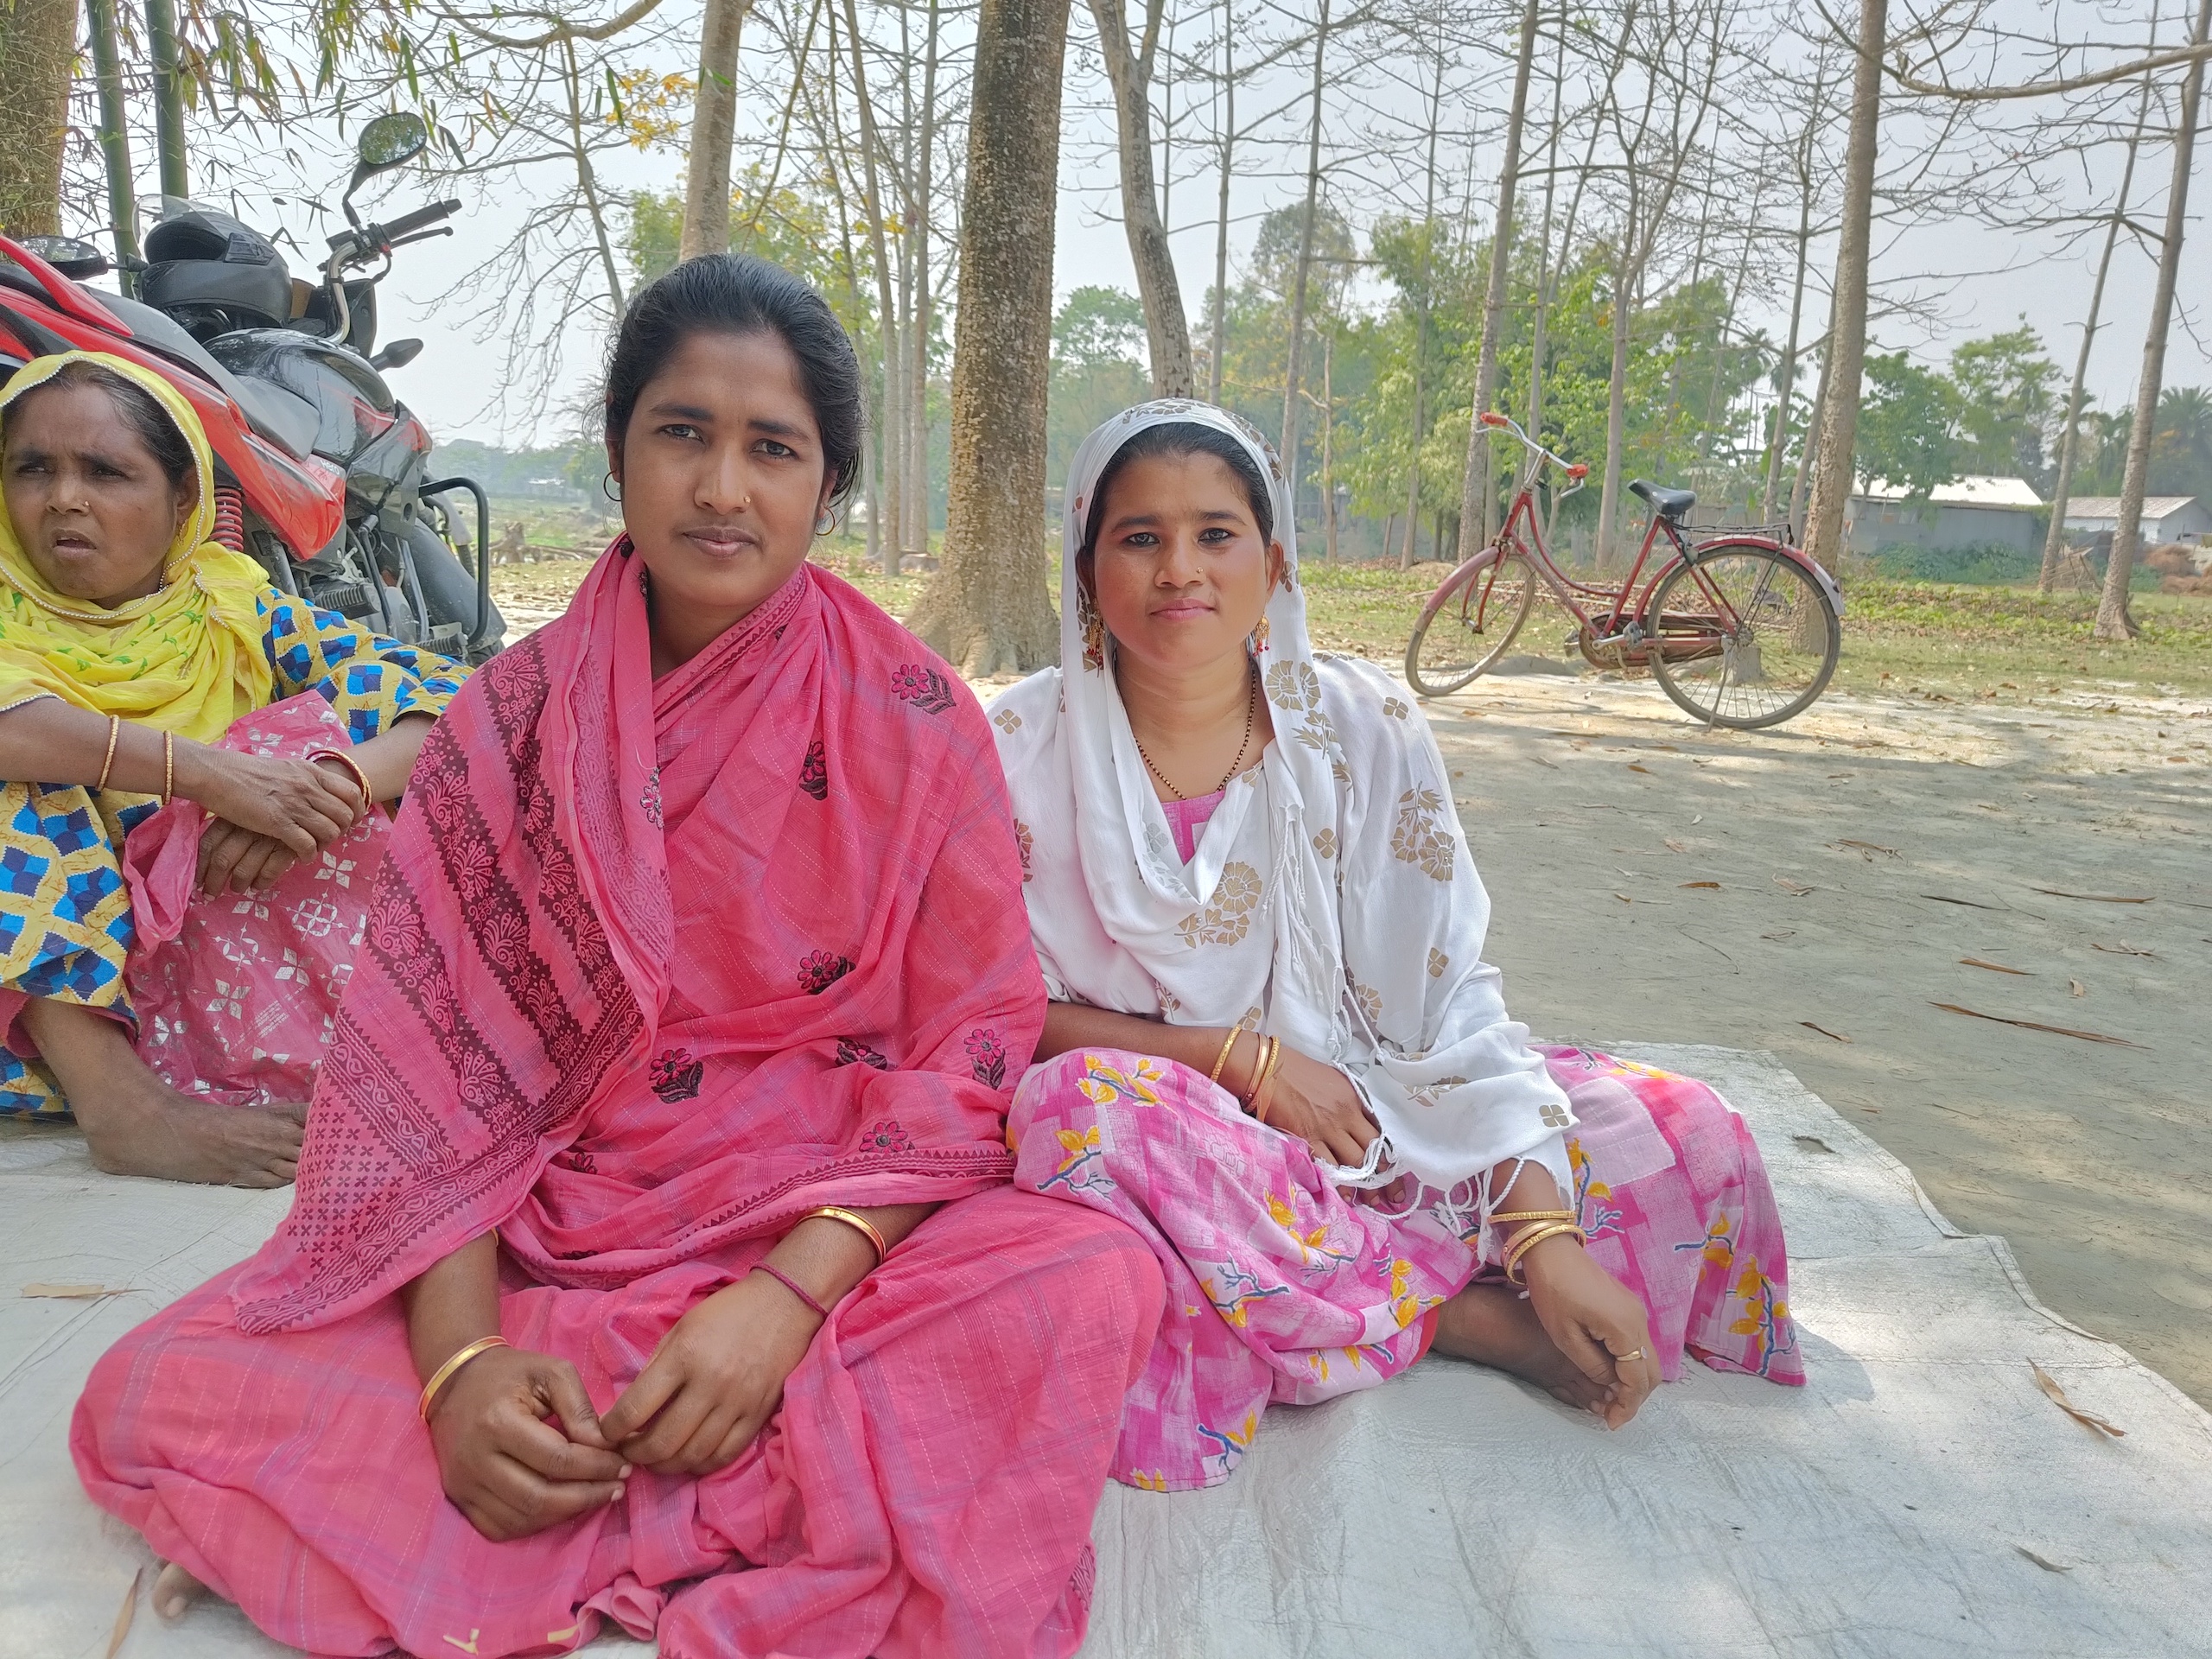 <p>Inawara Khatun (centre) and her family choose to stay in the village of Rupakuchi in Assam, despite the financial hardships and emotional distress brought by flooding. She says migrating would meaning losing the social relationships and networks that help her survive in the aftermath of disasters. (Image: Aatreyee Dhar)</p>